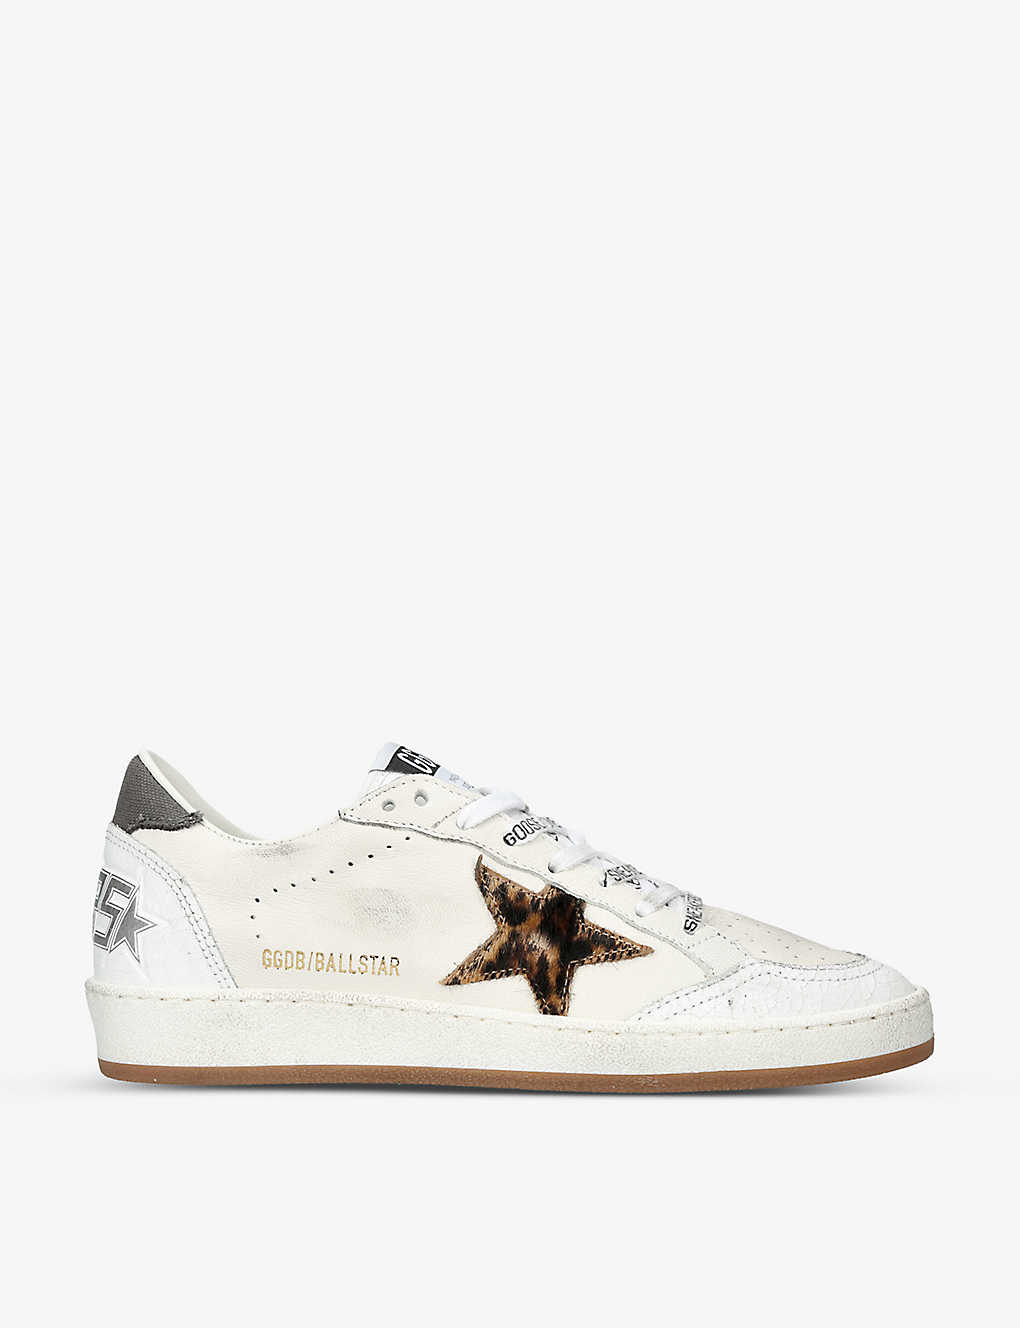 Golden Goose Ball Star 10889 Leather Low-top Trainers In White/comb